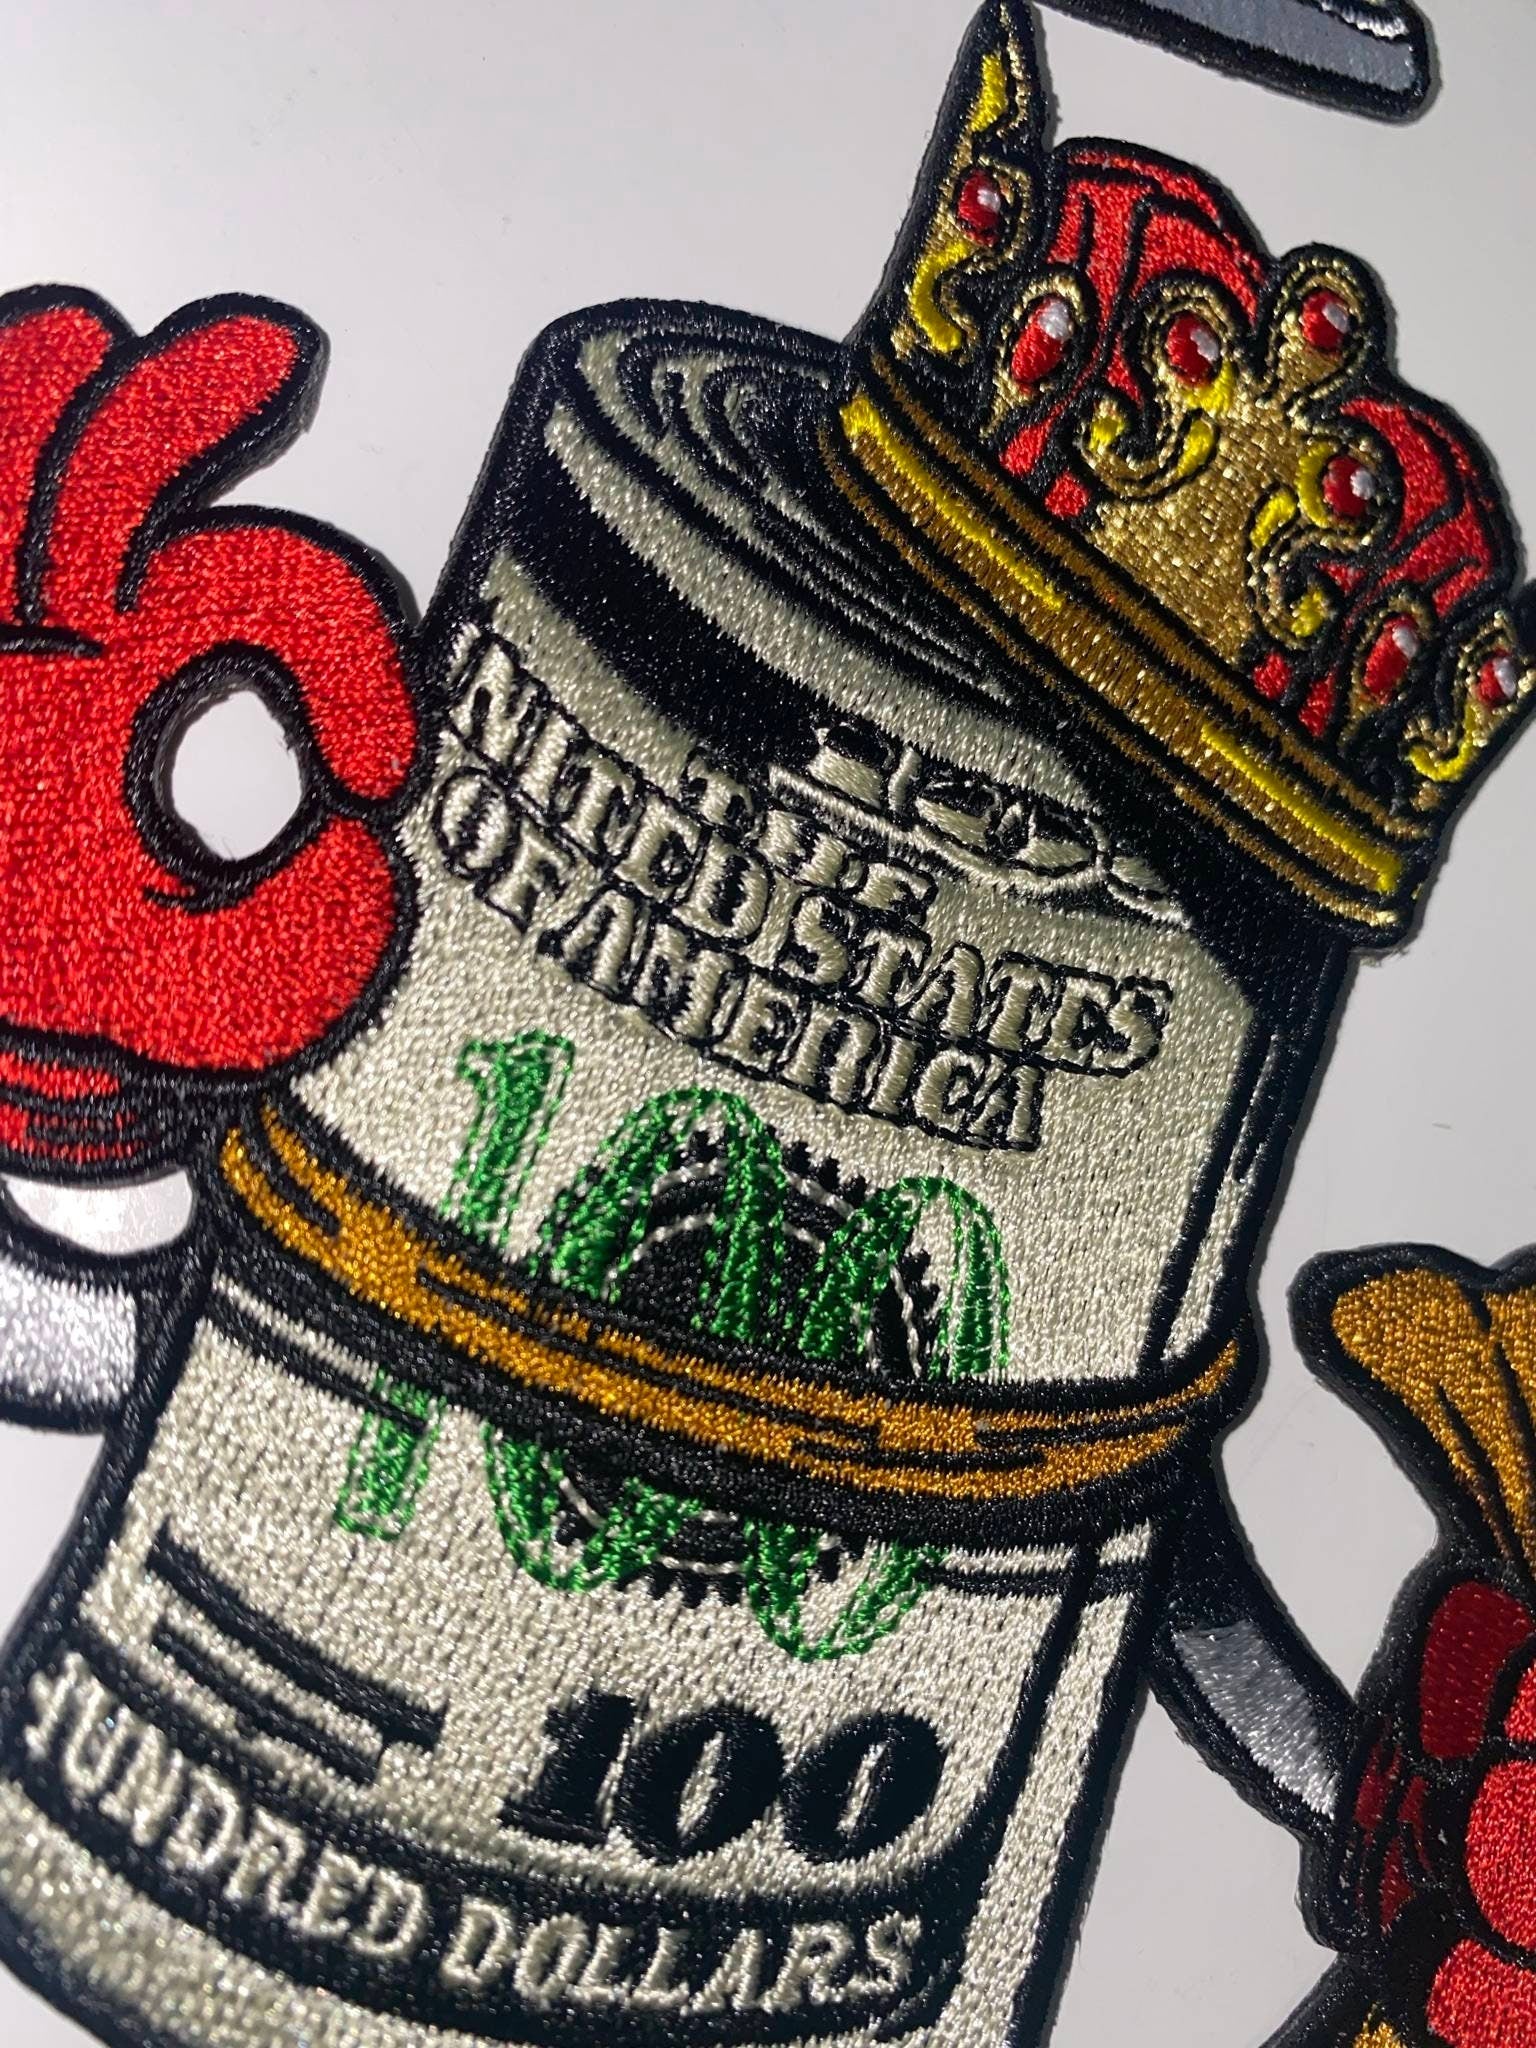 New Arrival, "Money Bag King" Bag Secured Patch, Size 5.5", Iron-on 100% Embroidered Patch; Entrepreneur Gift; Fun Jacket Patch, DIY